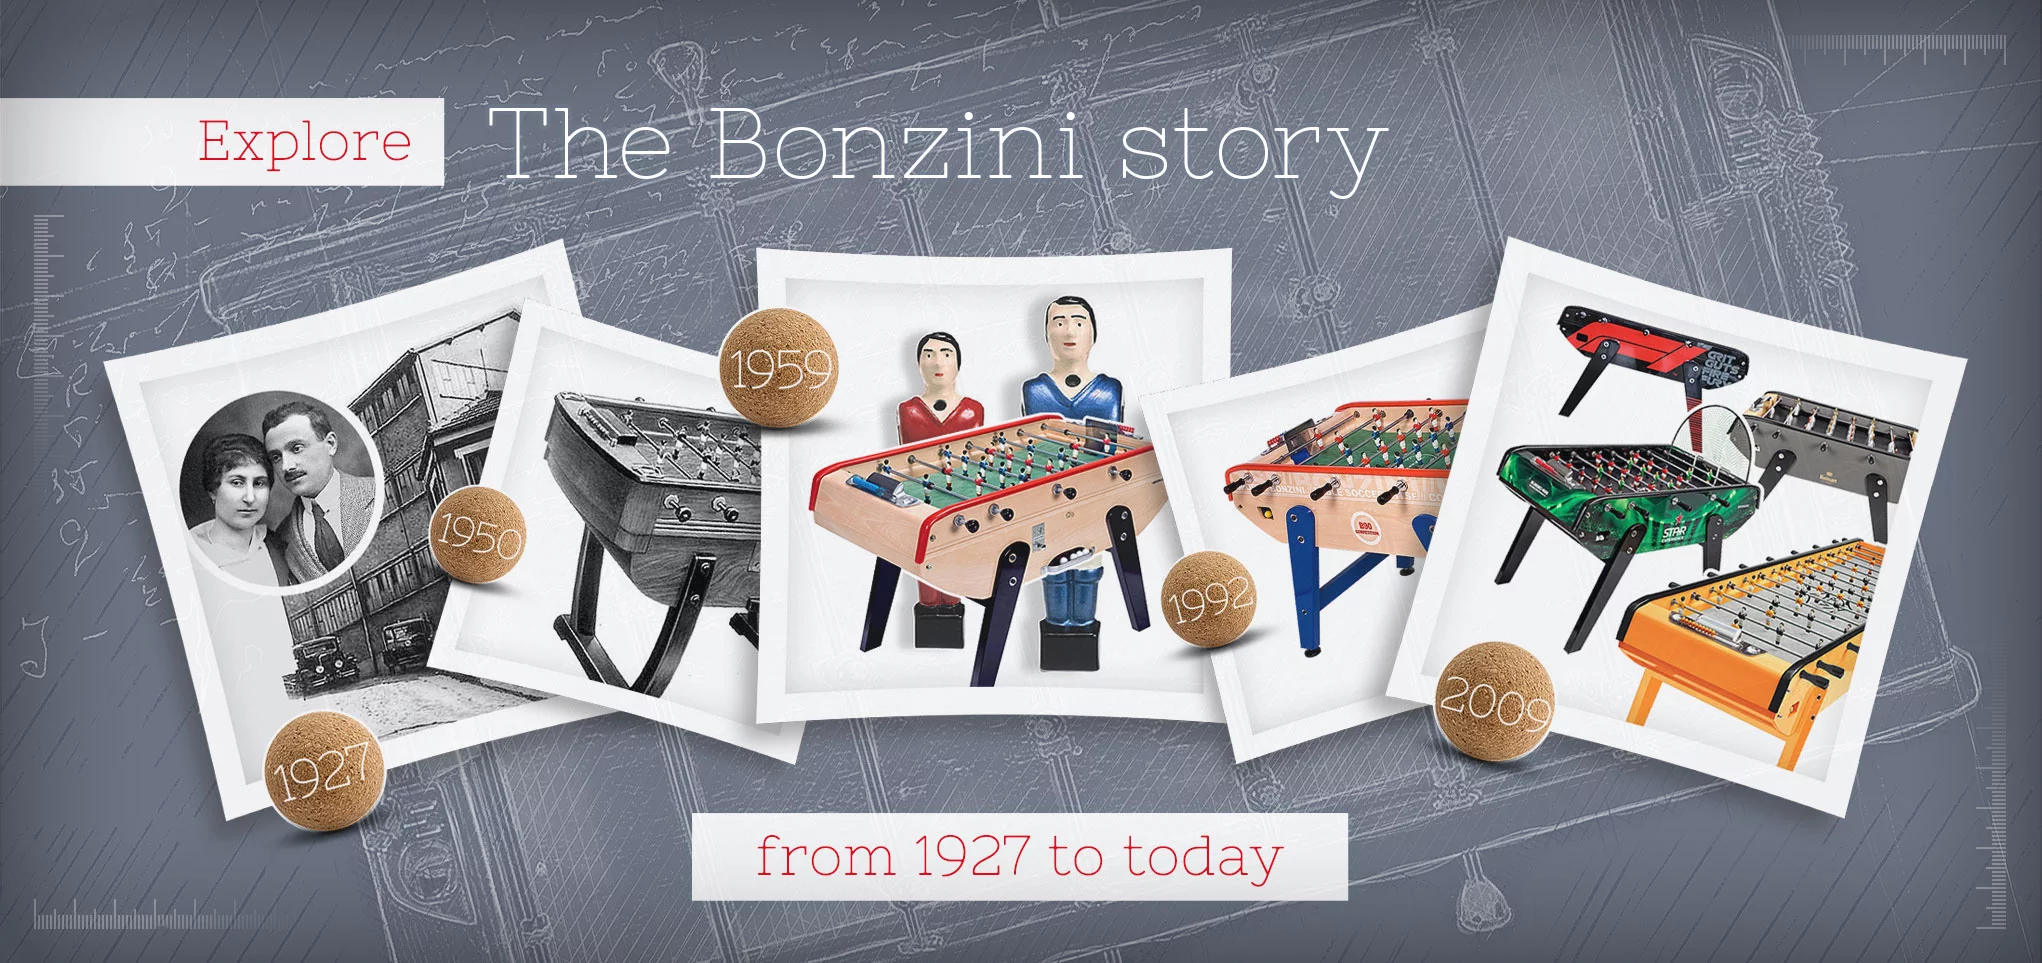 Explore The Bonzini story from 1927 to today